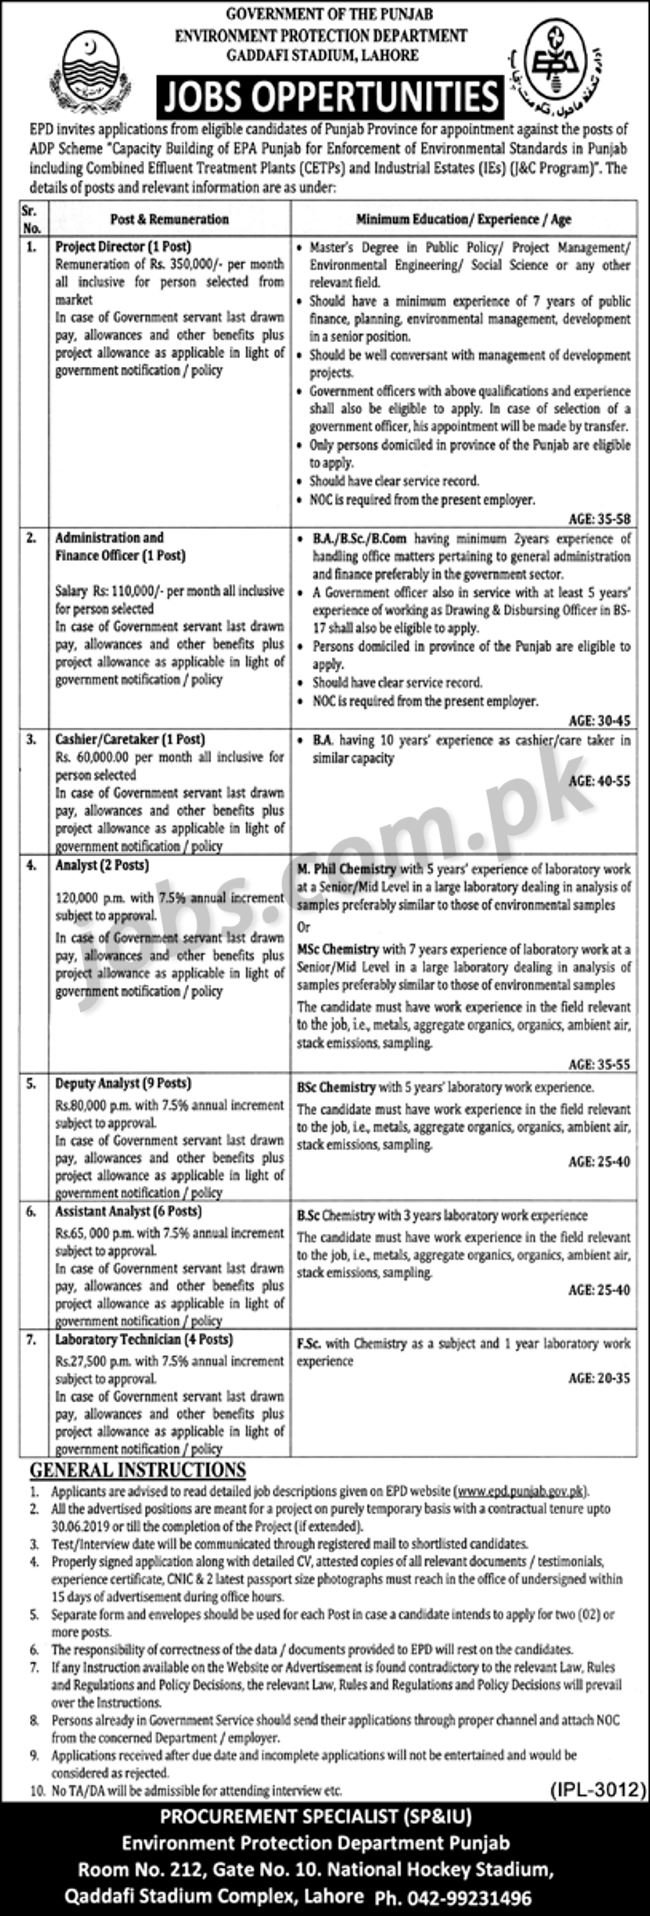 Environment Protection Department Punjab Jobs 2019 for 23+ Admin, Finance, Cashiers, Caretaker, Analysts & Other Posts